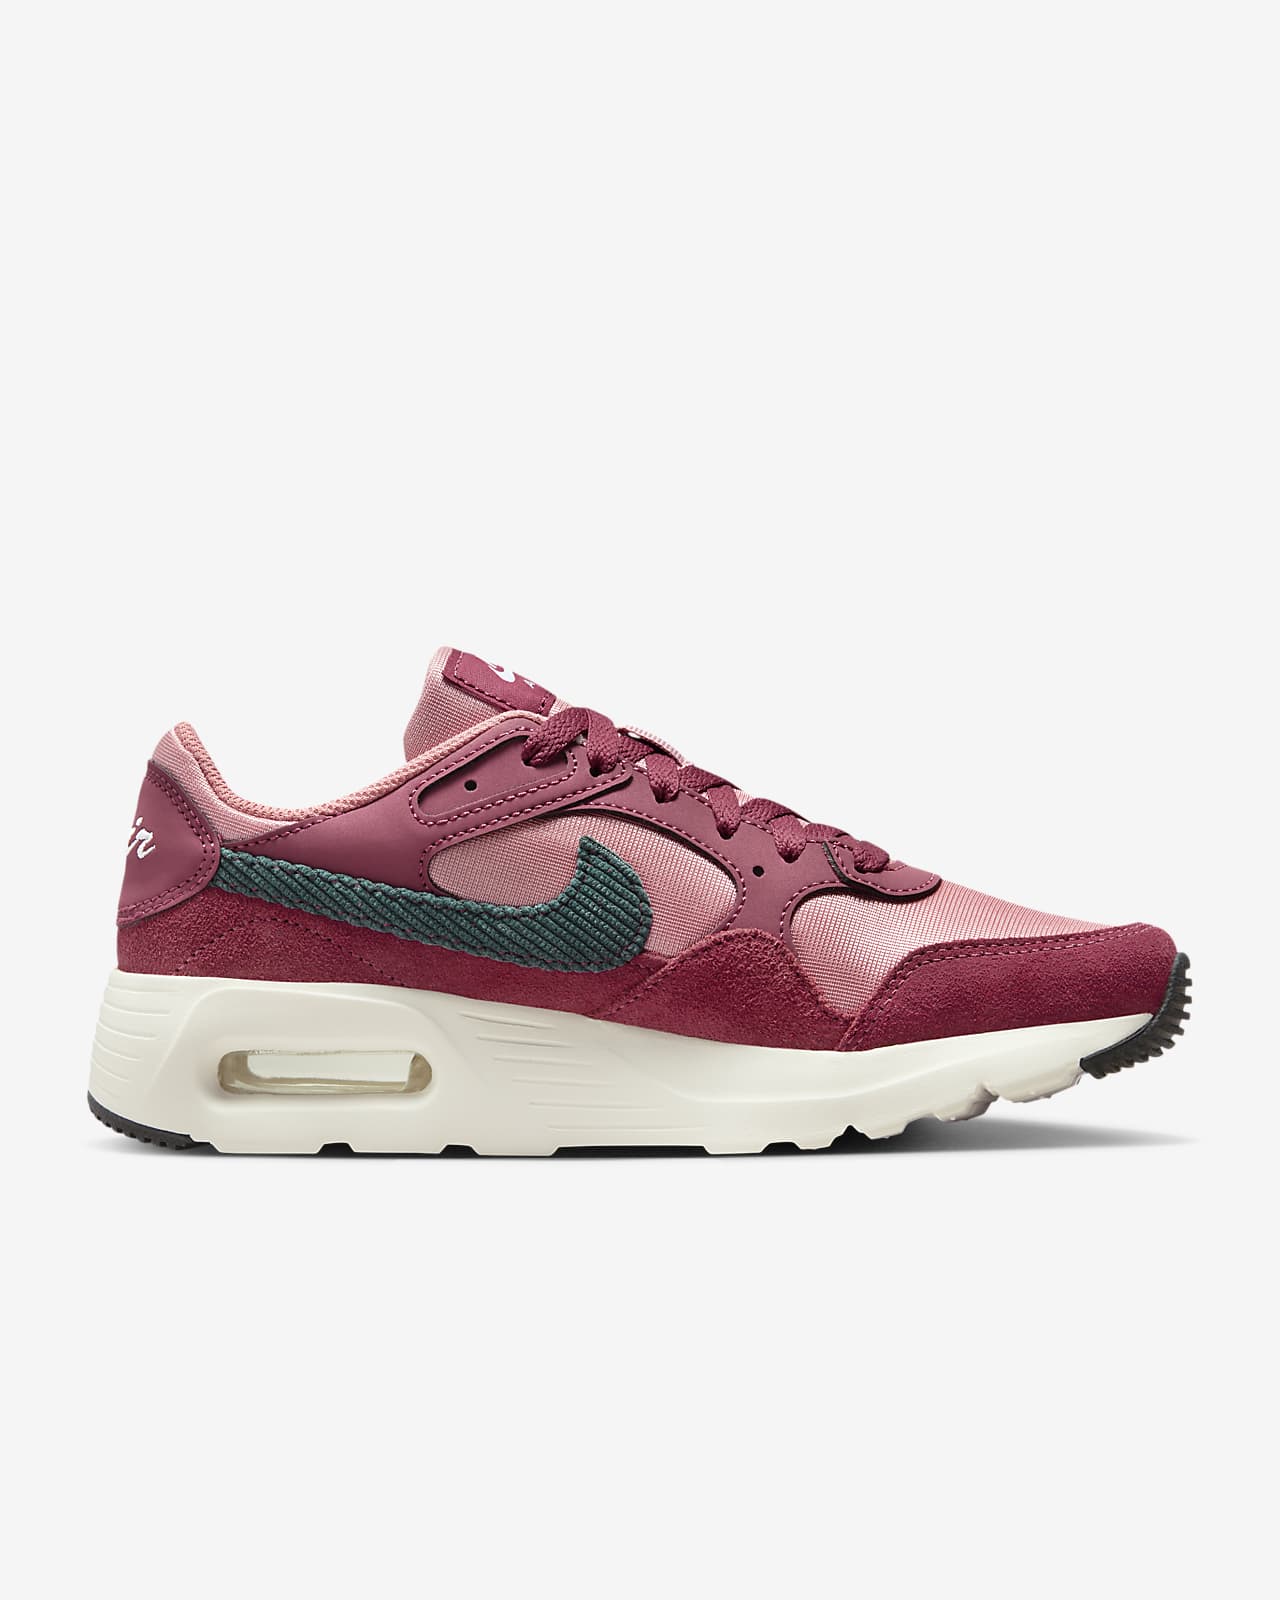 Nike Women's Air Max SC Shoes Pink Size 8.5 - $79 New With Tags - From  Bianca